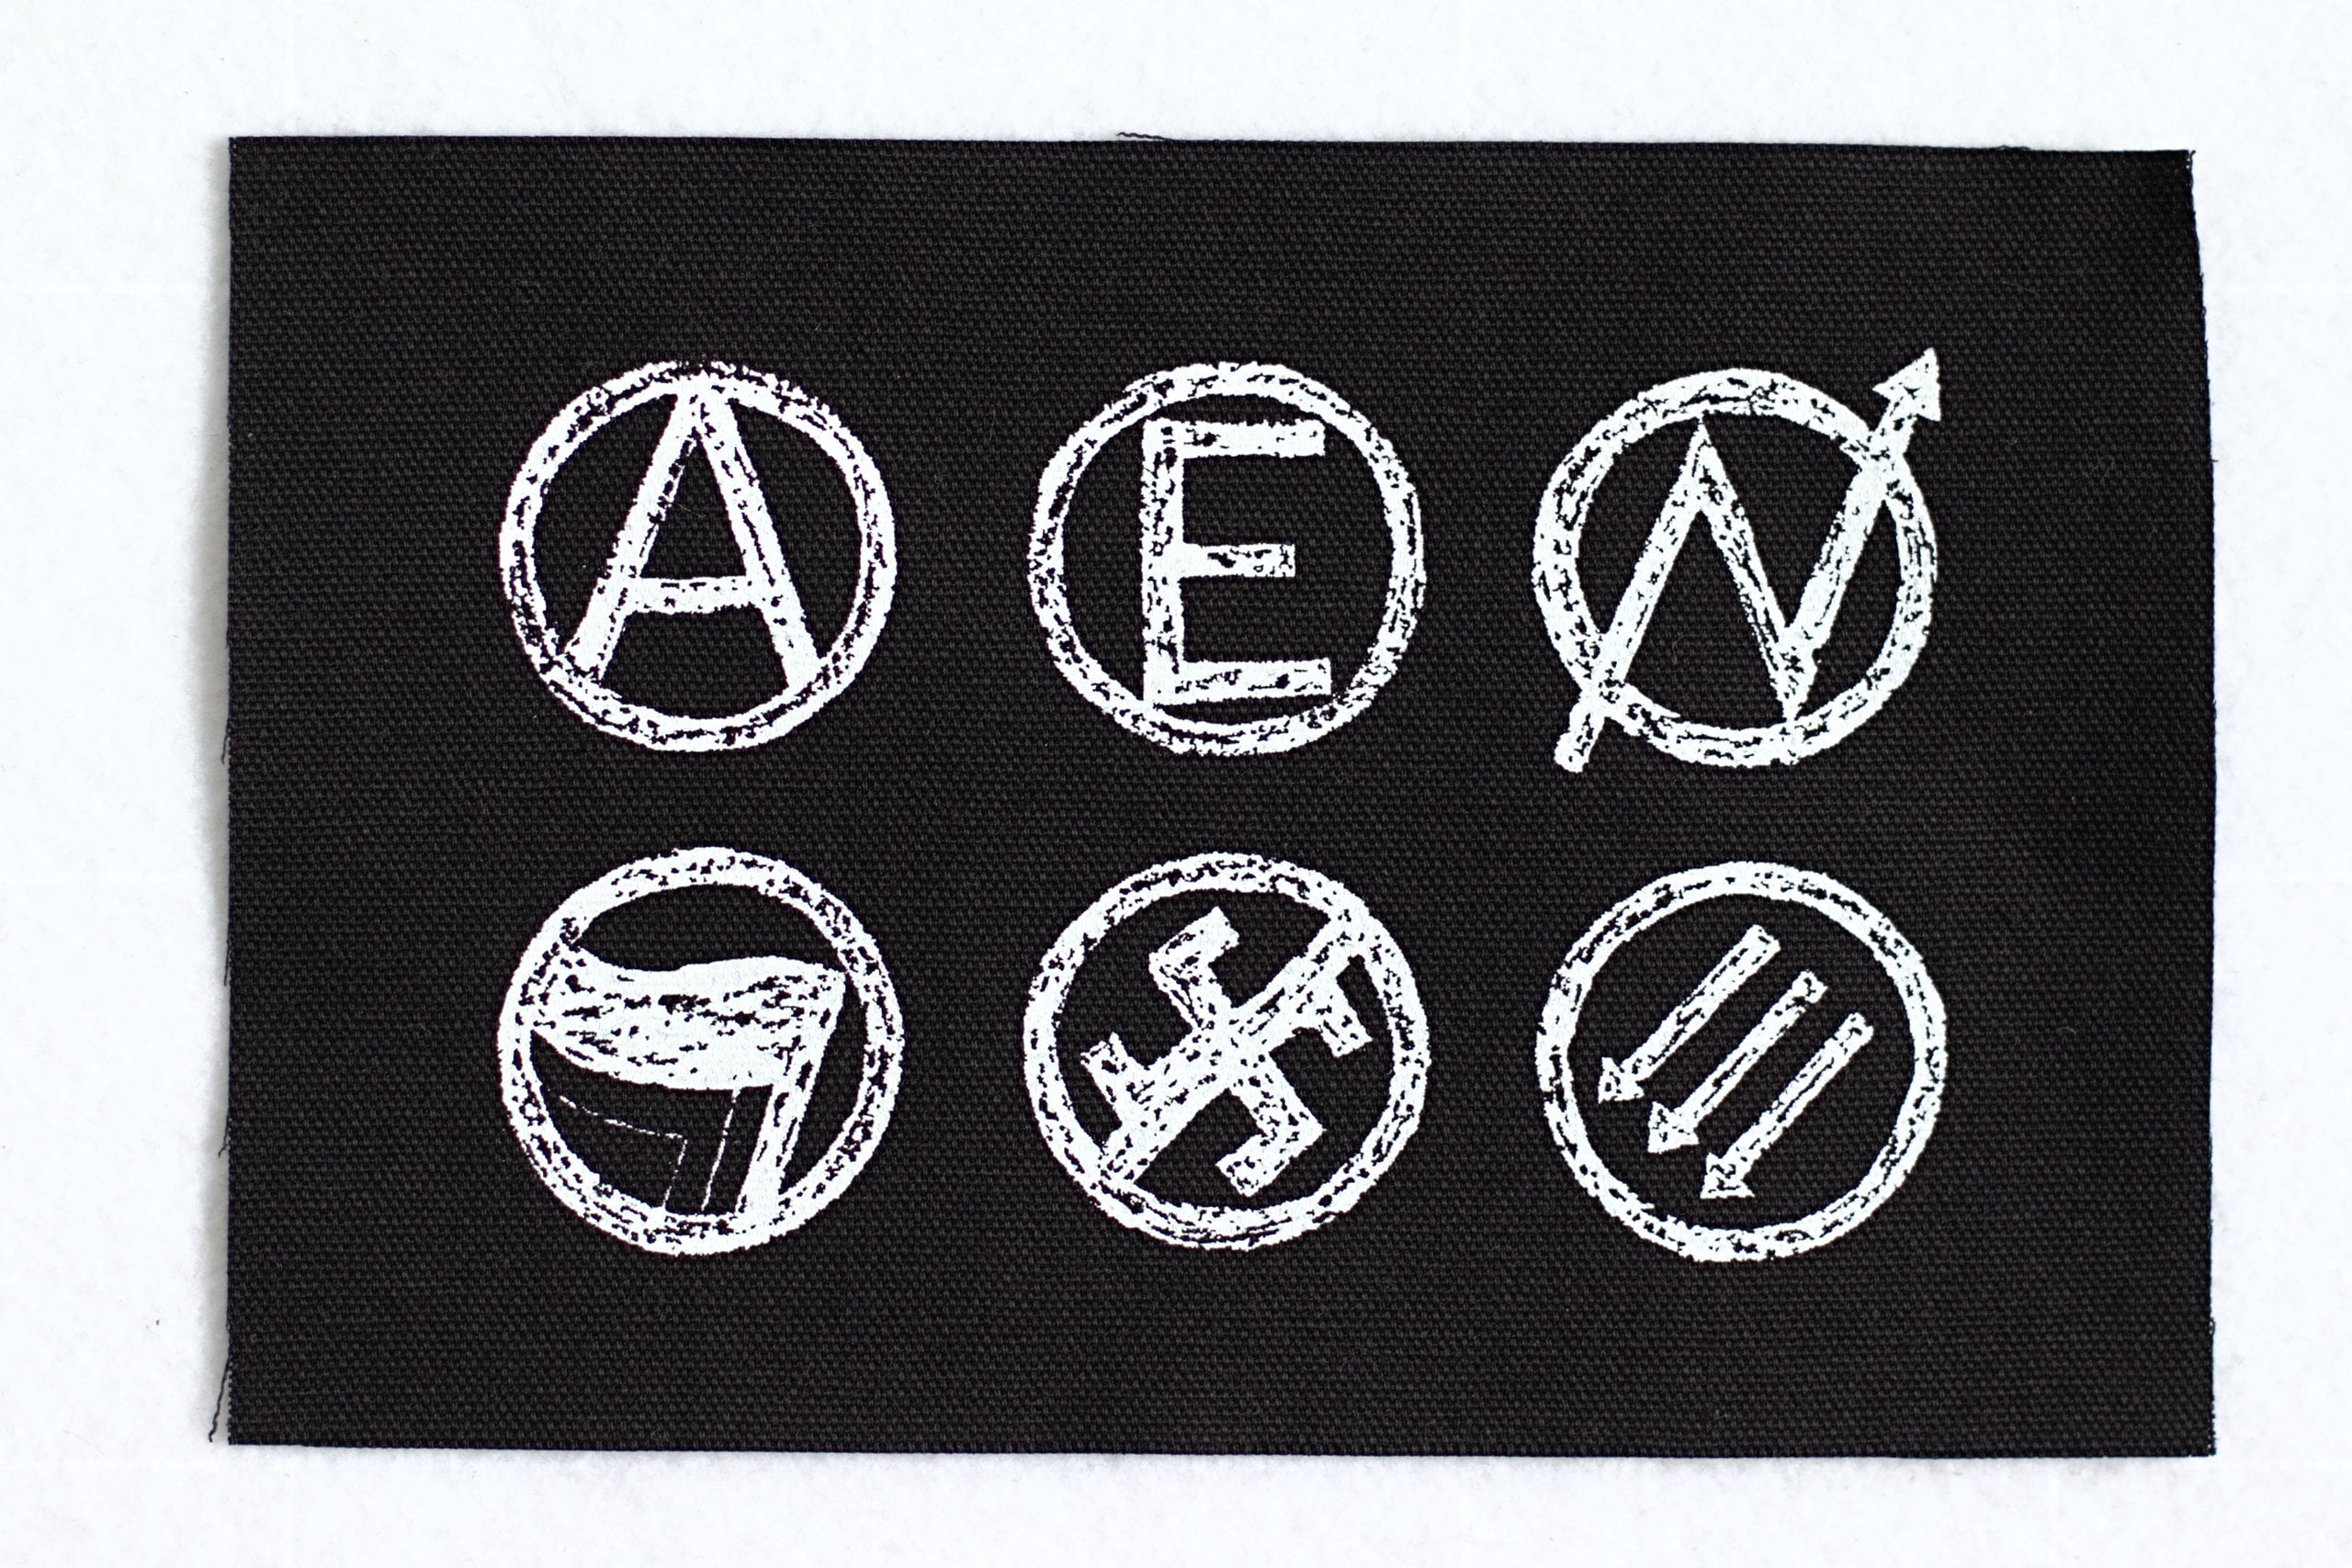 Punk Patch - We Are Not Afraid of Ruins - Big Canvas Back or Bag Patch,  White on Black OR Black on White, anarchy patch, punk patches